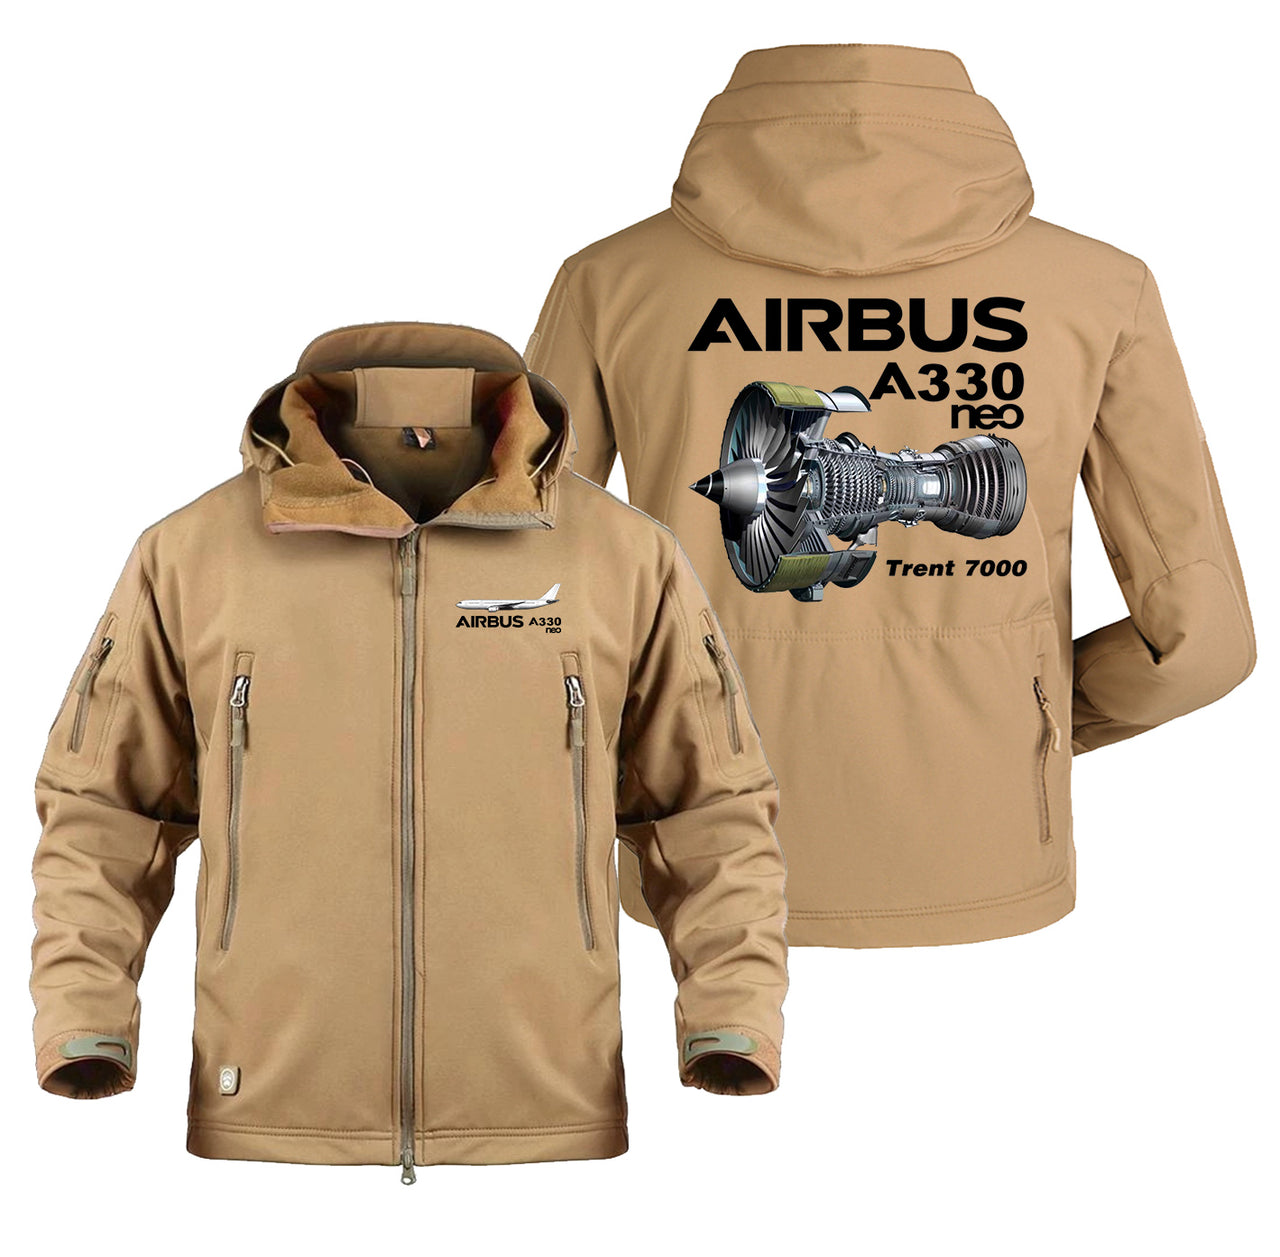 The Airbus A330neo & Trent 7000 Engine Designed Military Jackets (Customizable)